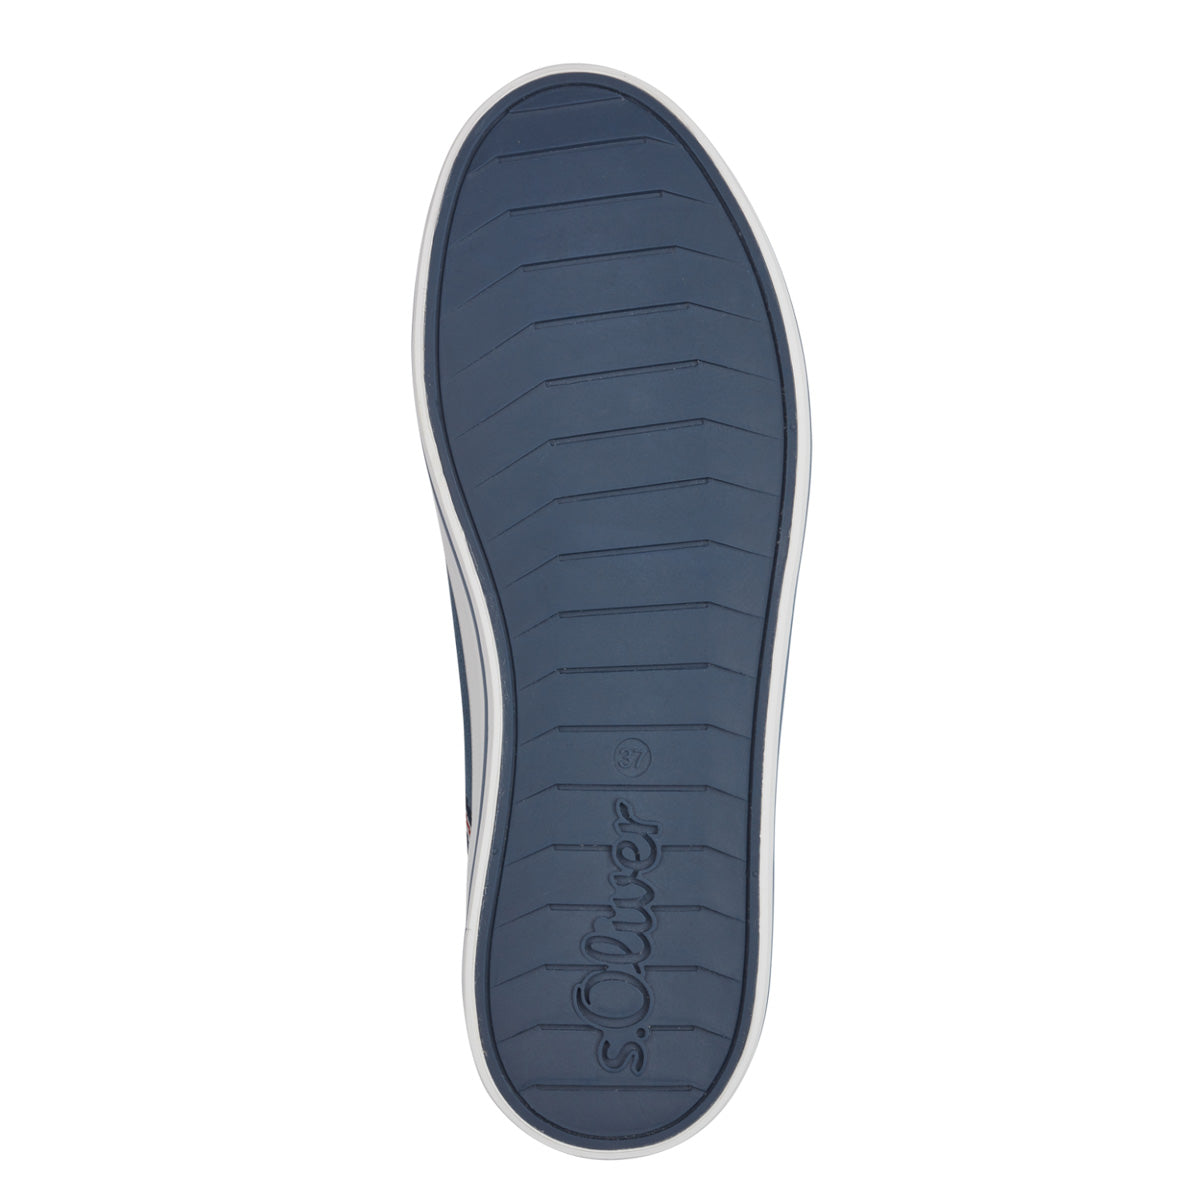 Top view of the S Oliver slip-on navy canvas sneakers, emphasizing the elasticated opening.